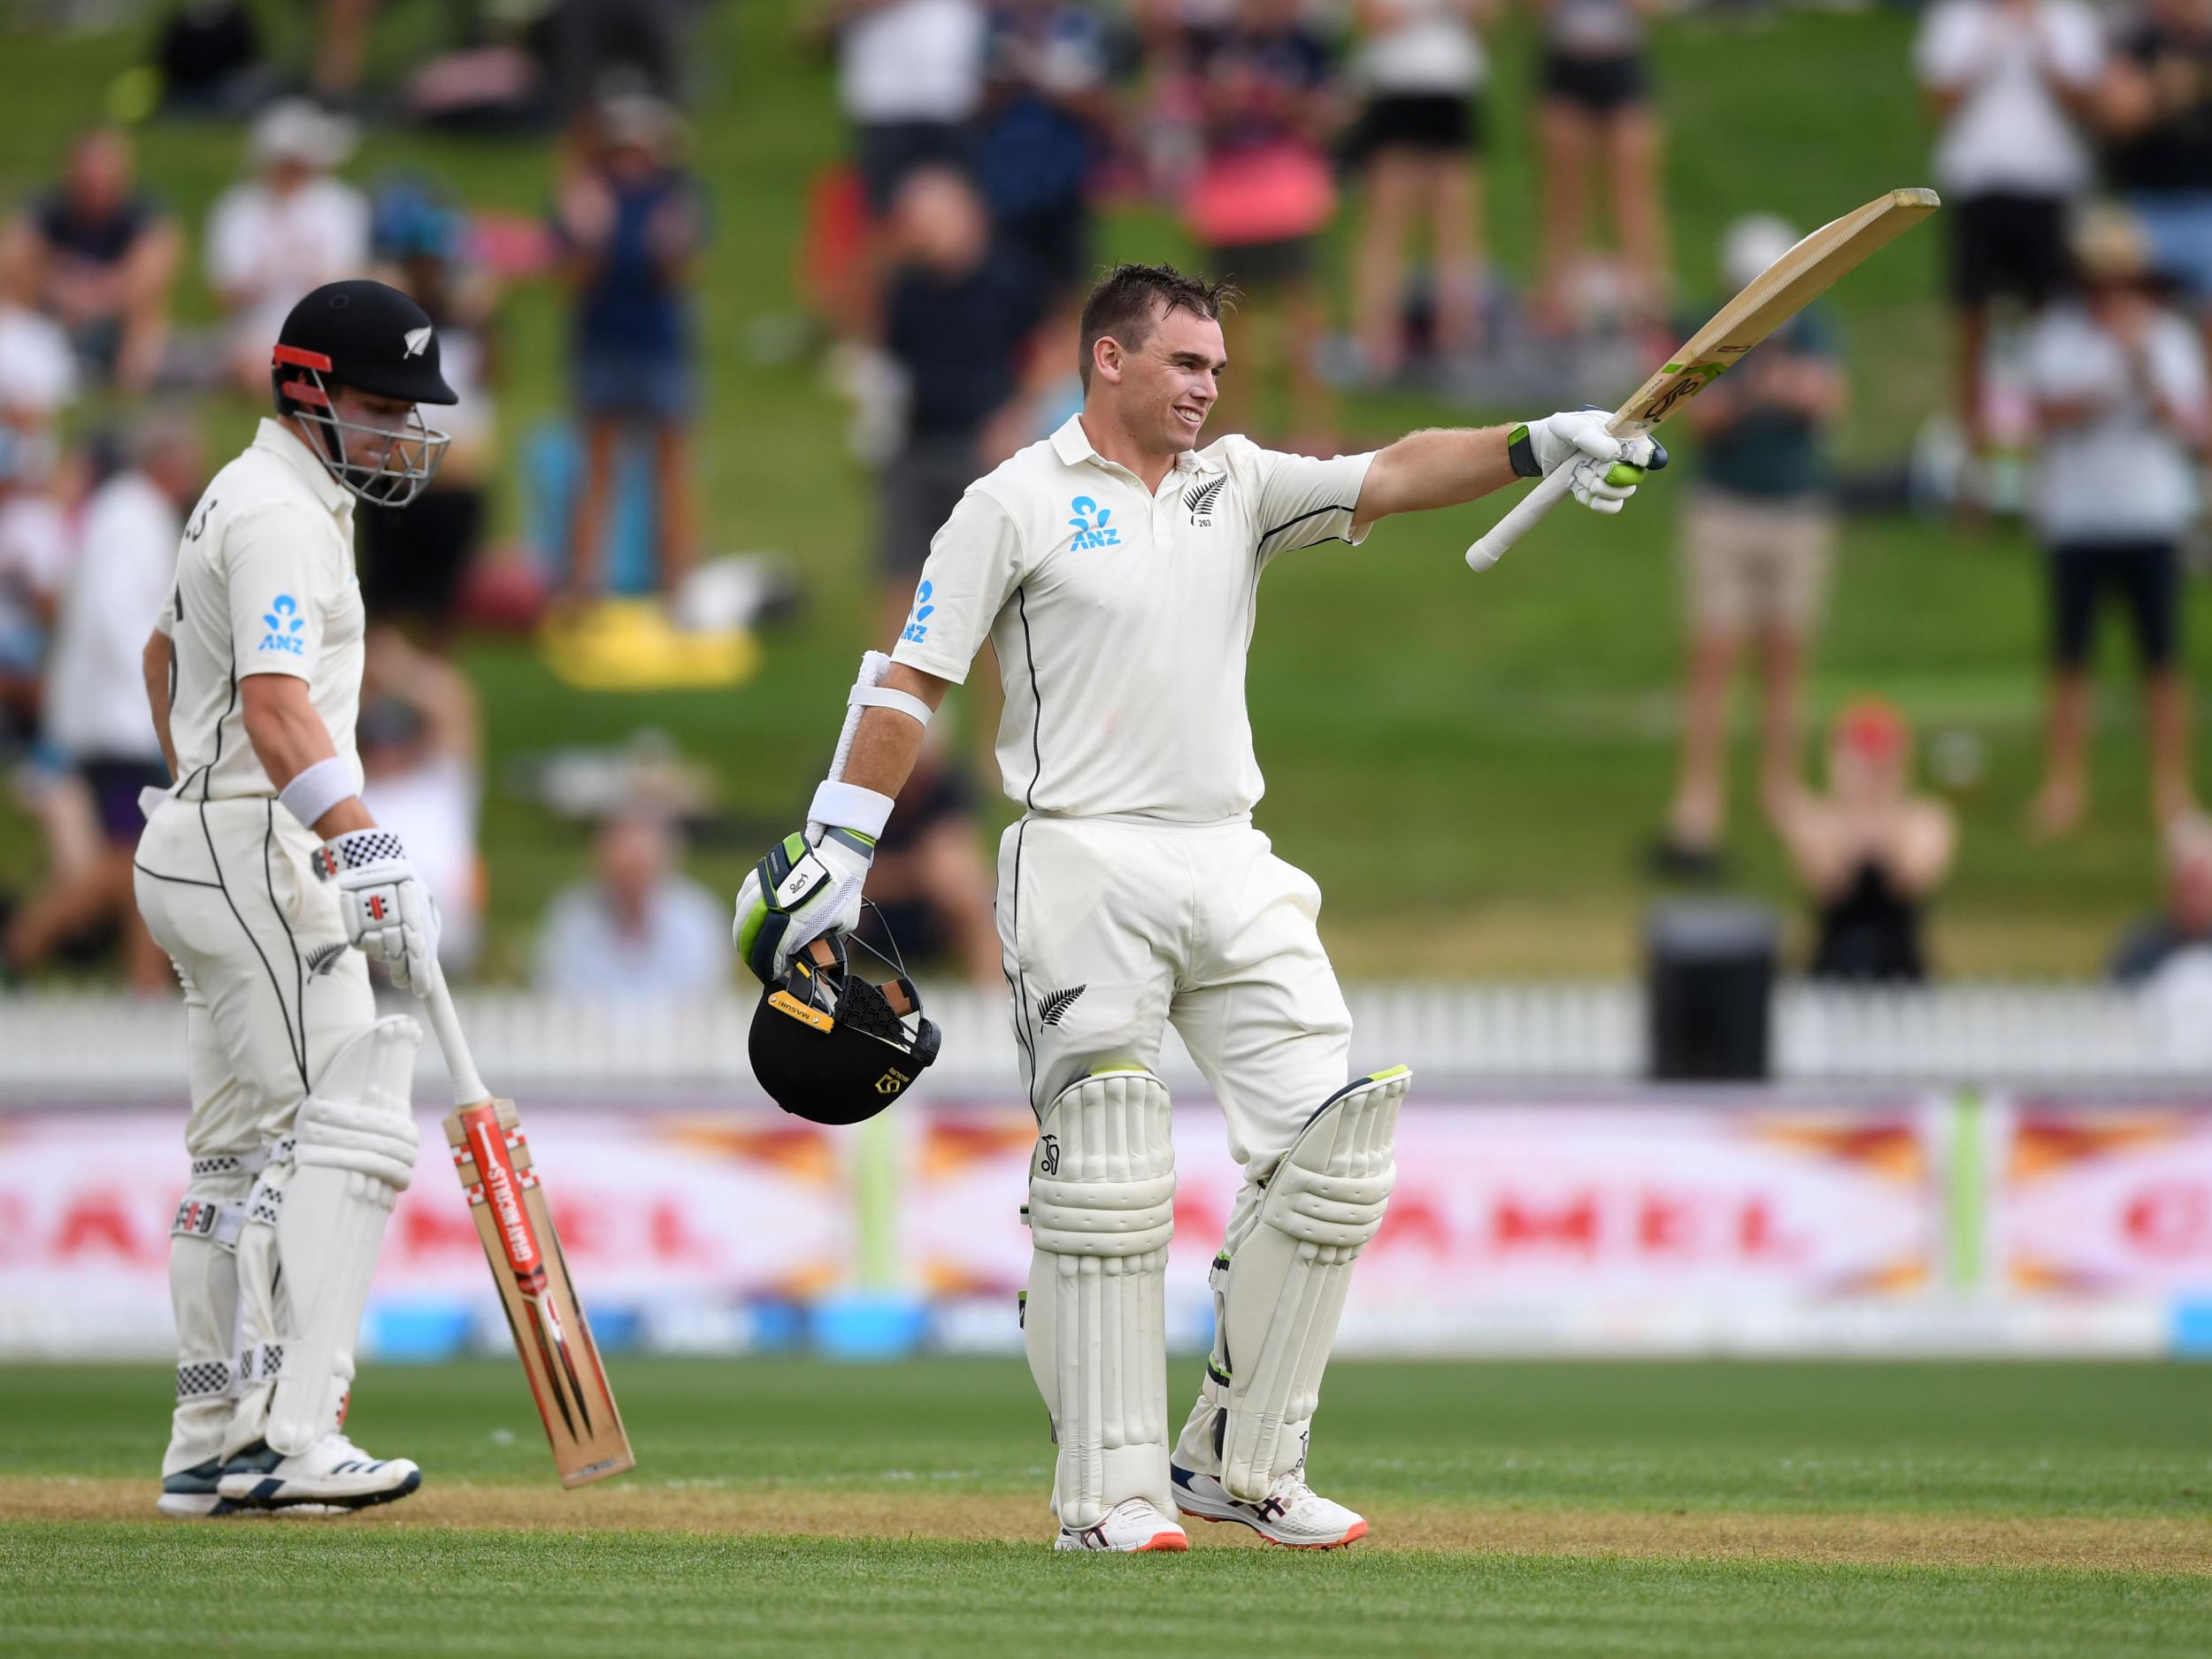 Tom Latham scored a fifth hundred in his last ten Test innings as New Zealand's batsmen again frustrated England